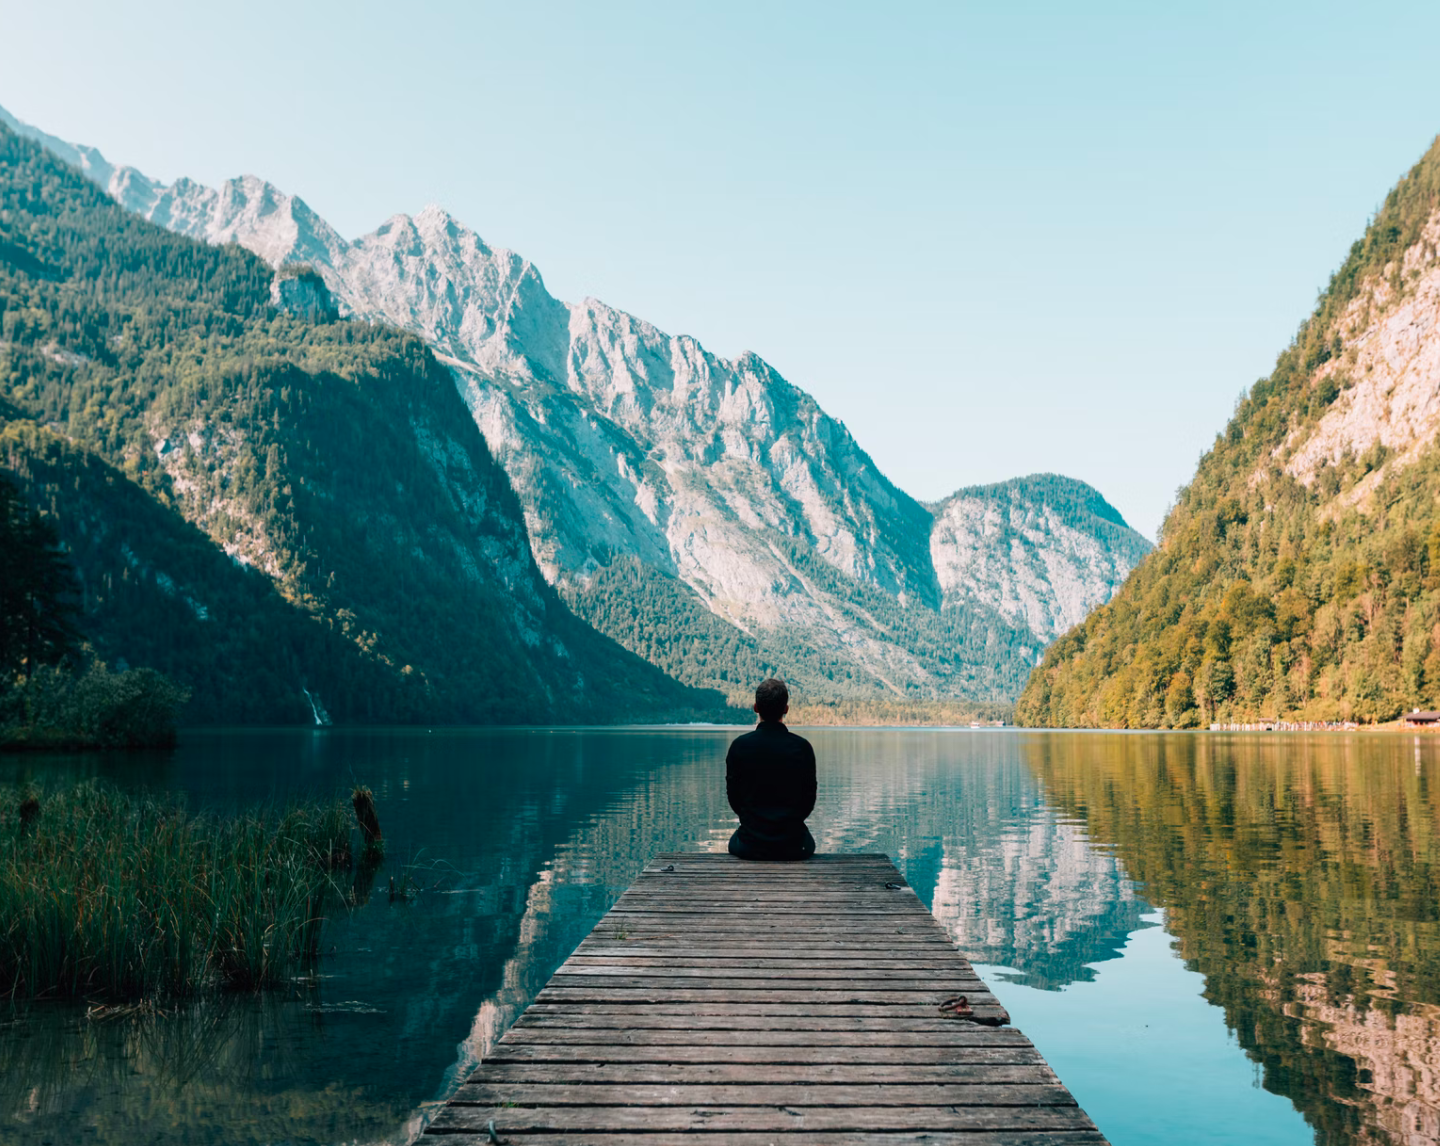 Person sitting at end of dock overlooking mountain range and lake